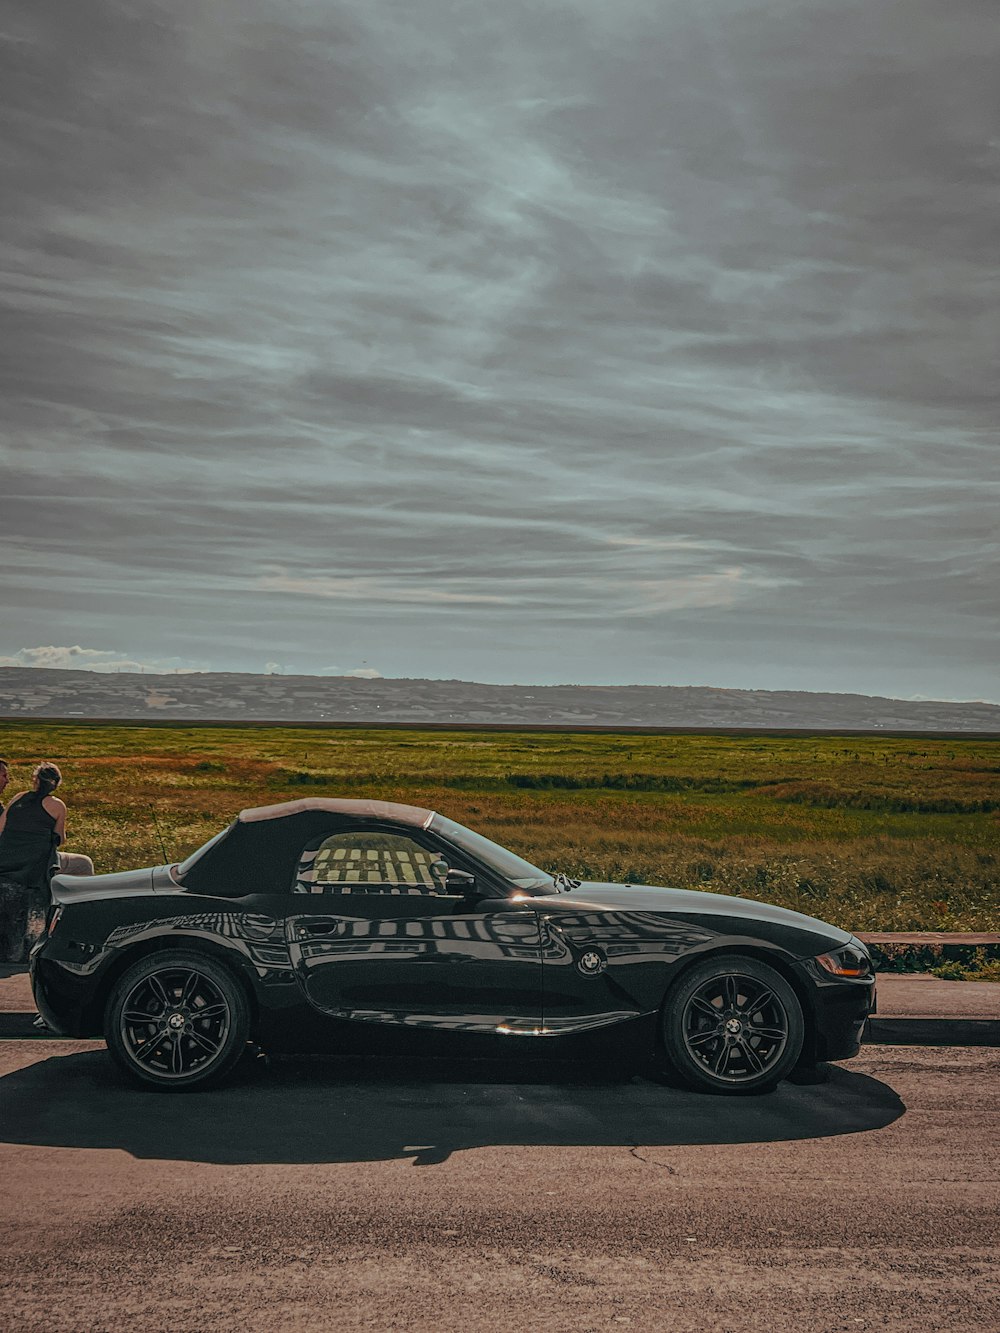 a black sports car parked on a road with a field in the background